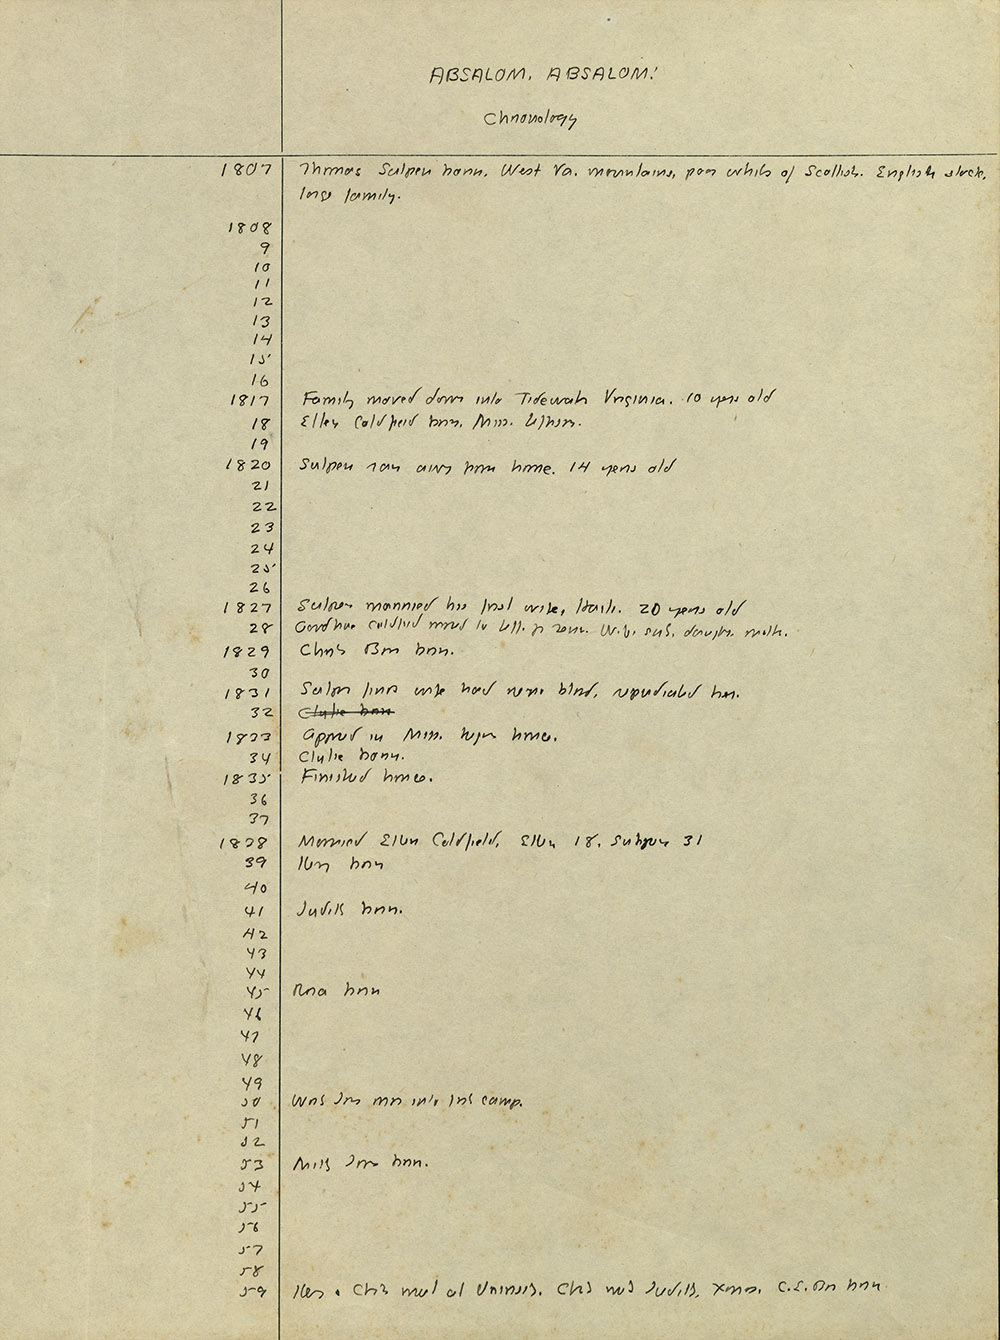 Page 1, Faulkner's Absalom Chronology